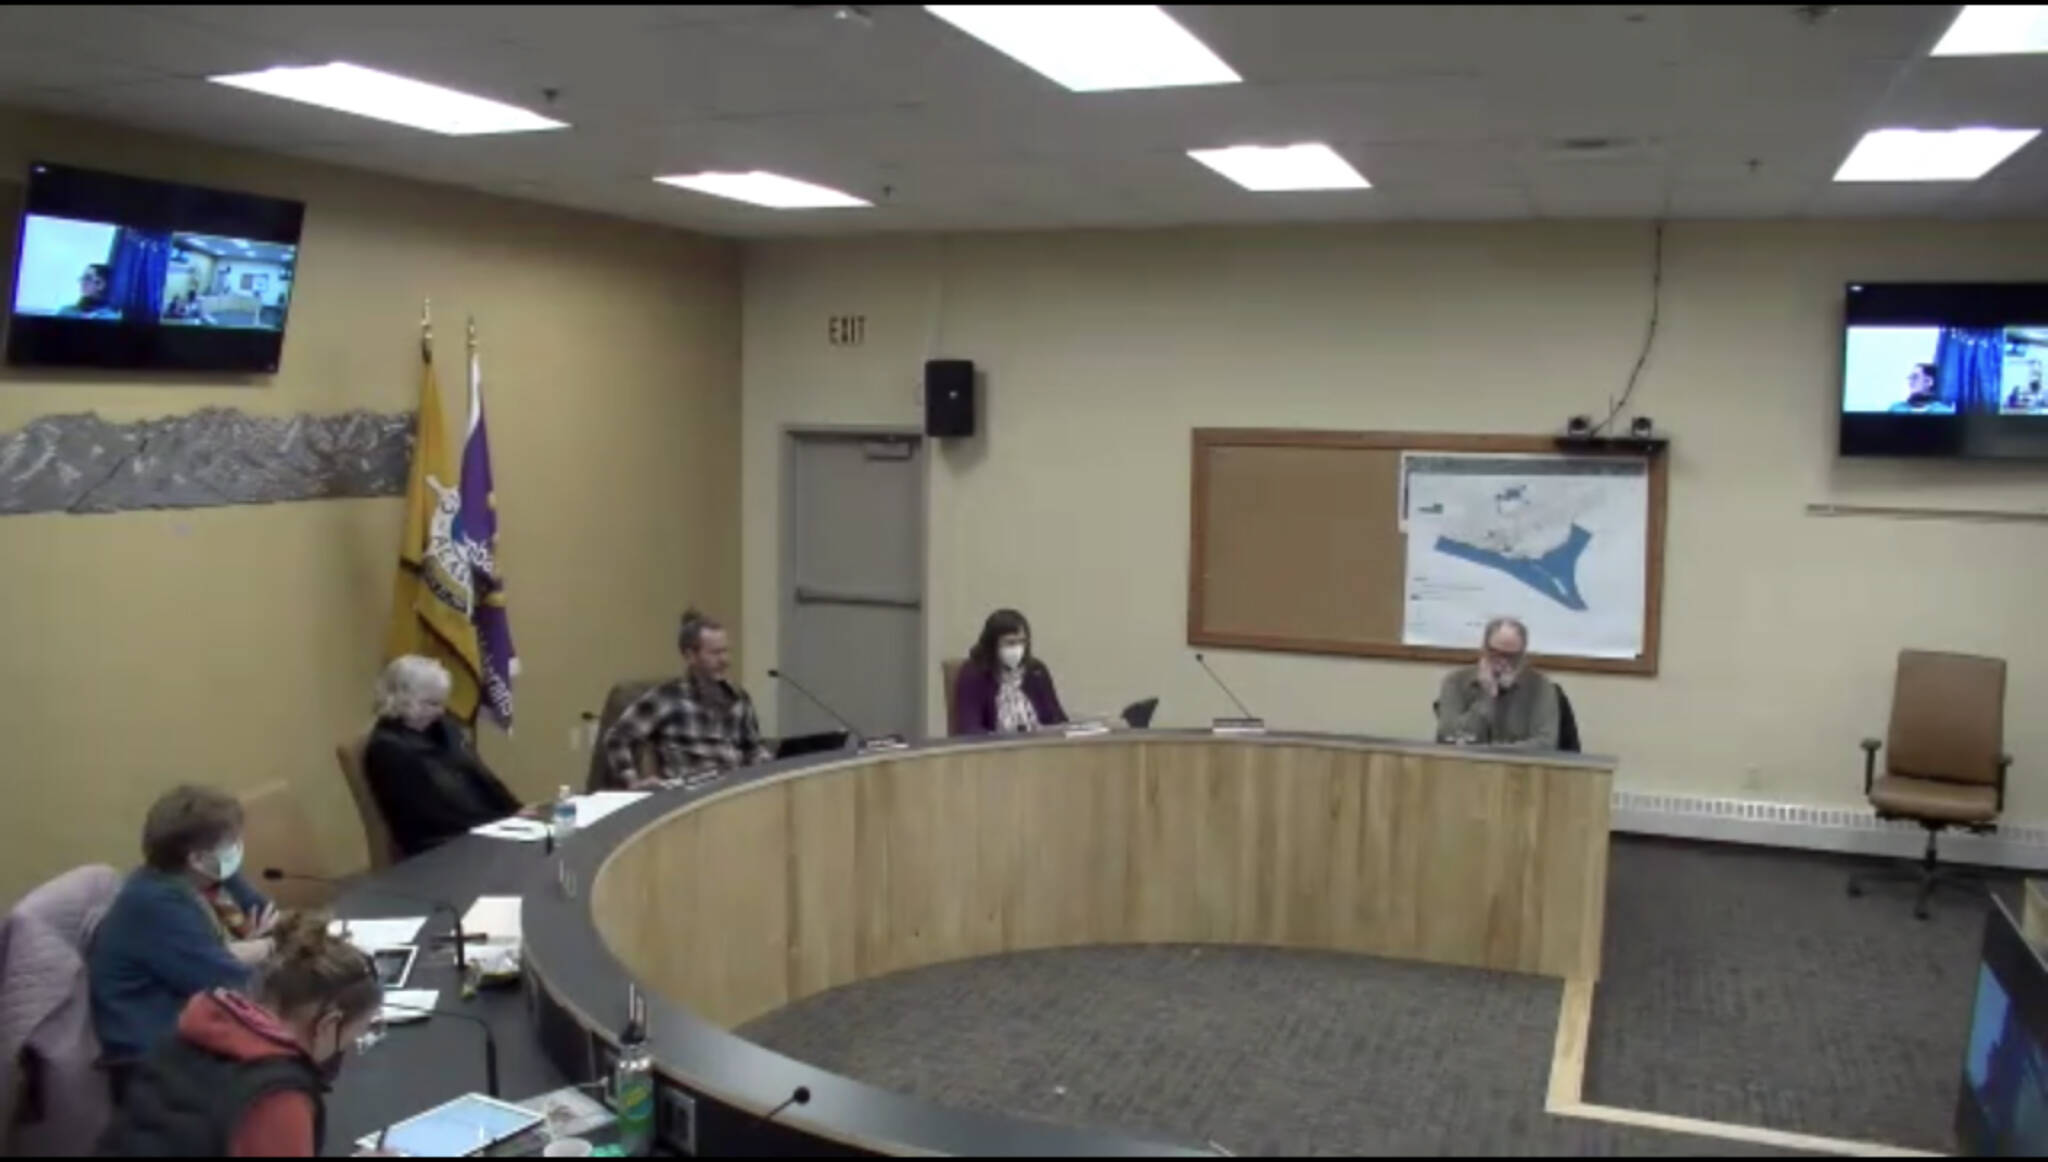 Homer Mayor Ken Castner, far right, and members of the Homer City Council meet on Monday, March 14, 2022, in the Cowles Council Chambers, Homer City Hall, in Homer, Alaska. Because of lower COVID-19 pandemic levels, face masks are now optional at City Hall (Screenshot)